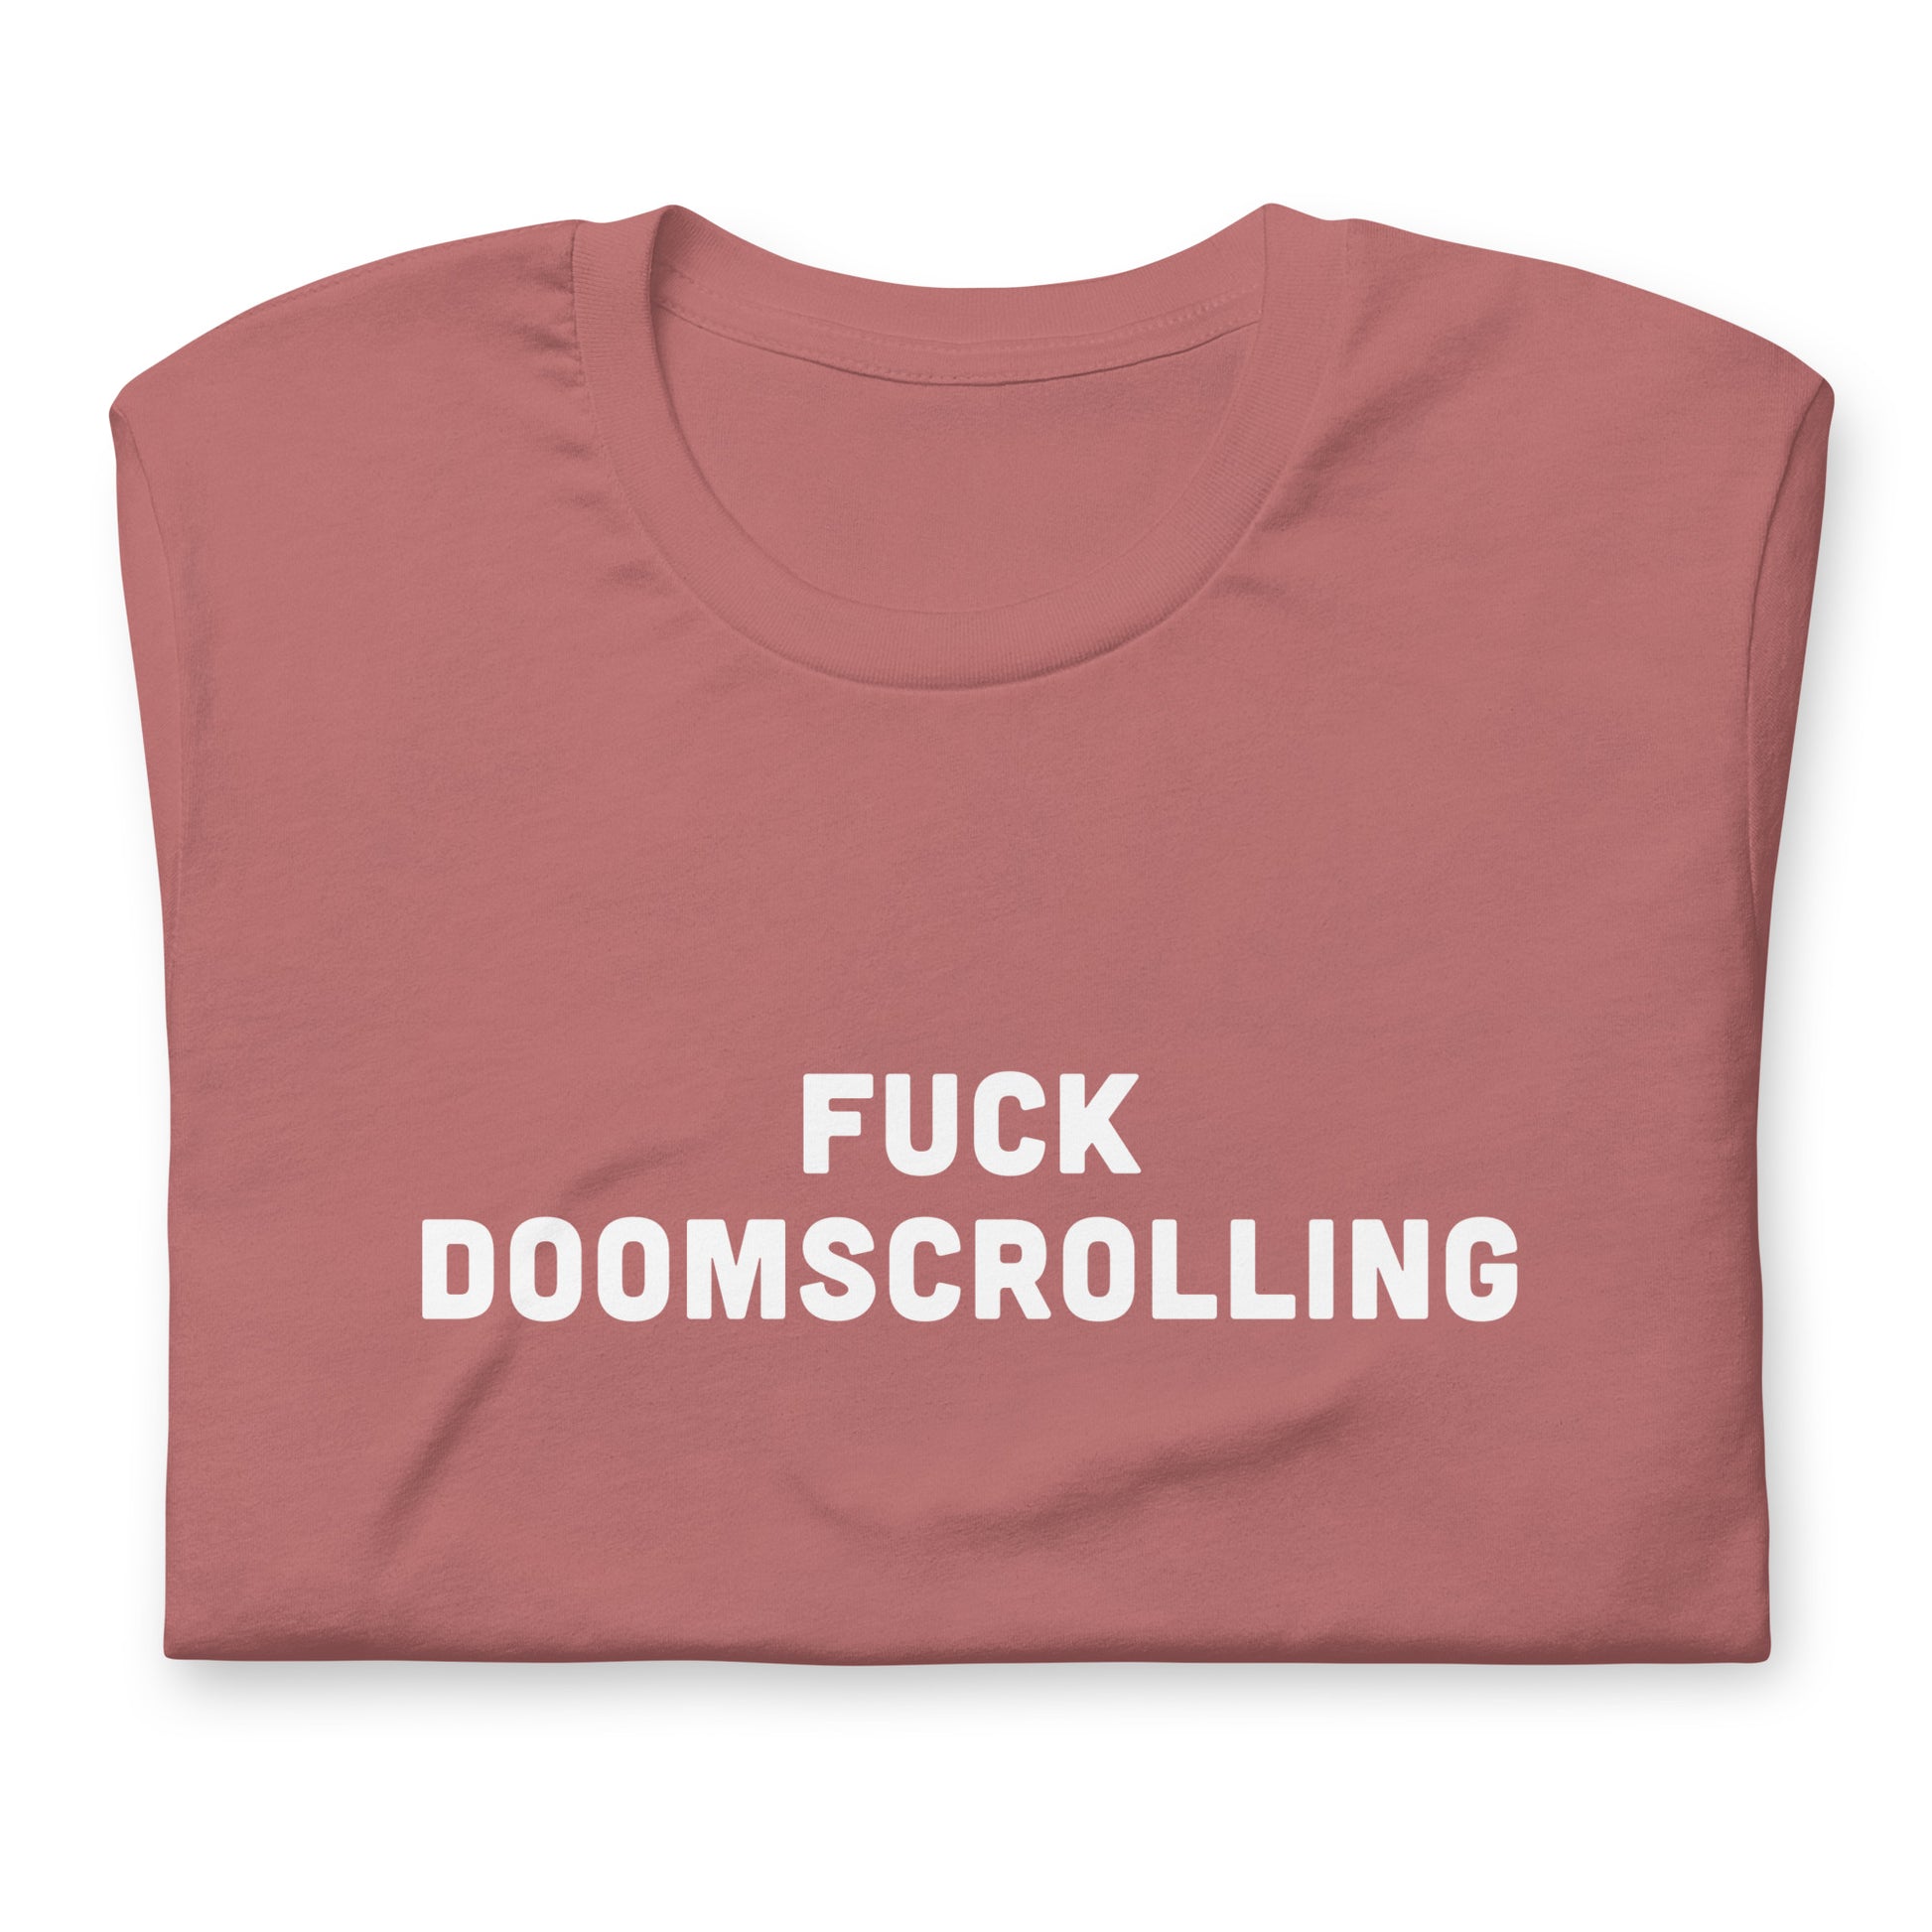 Fuck Doomscrolling T-Shirt Size XL Color Navy